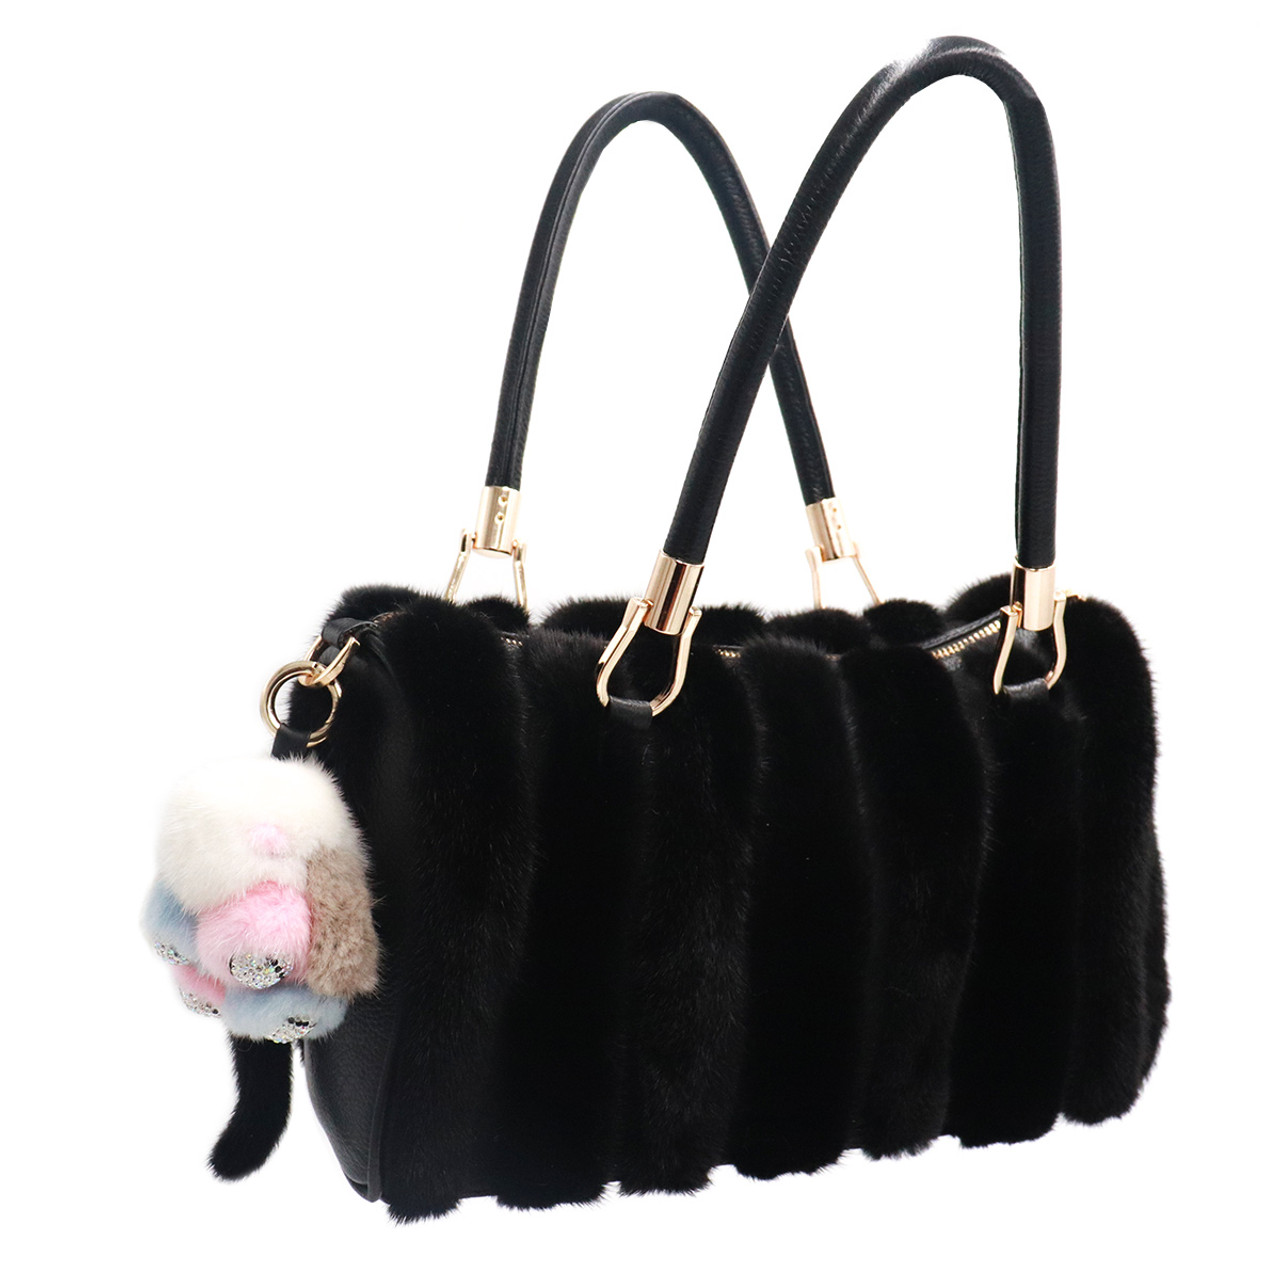 Fur Keychains and Fur pom poms made from fox, rabbit and mink